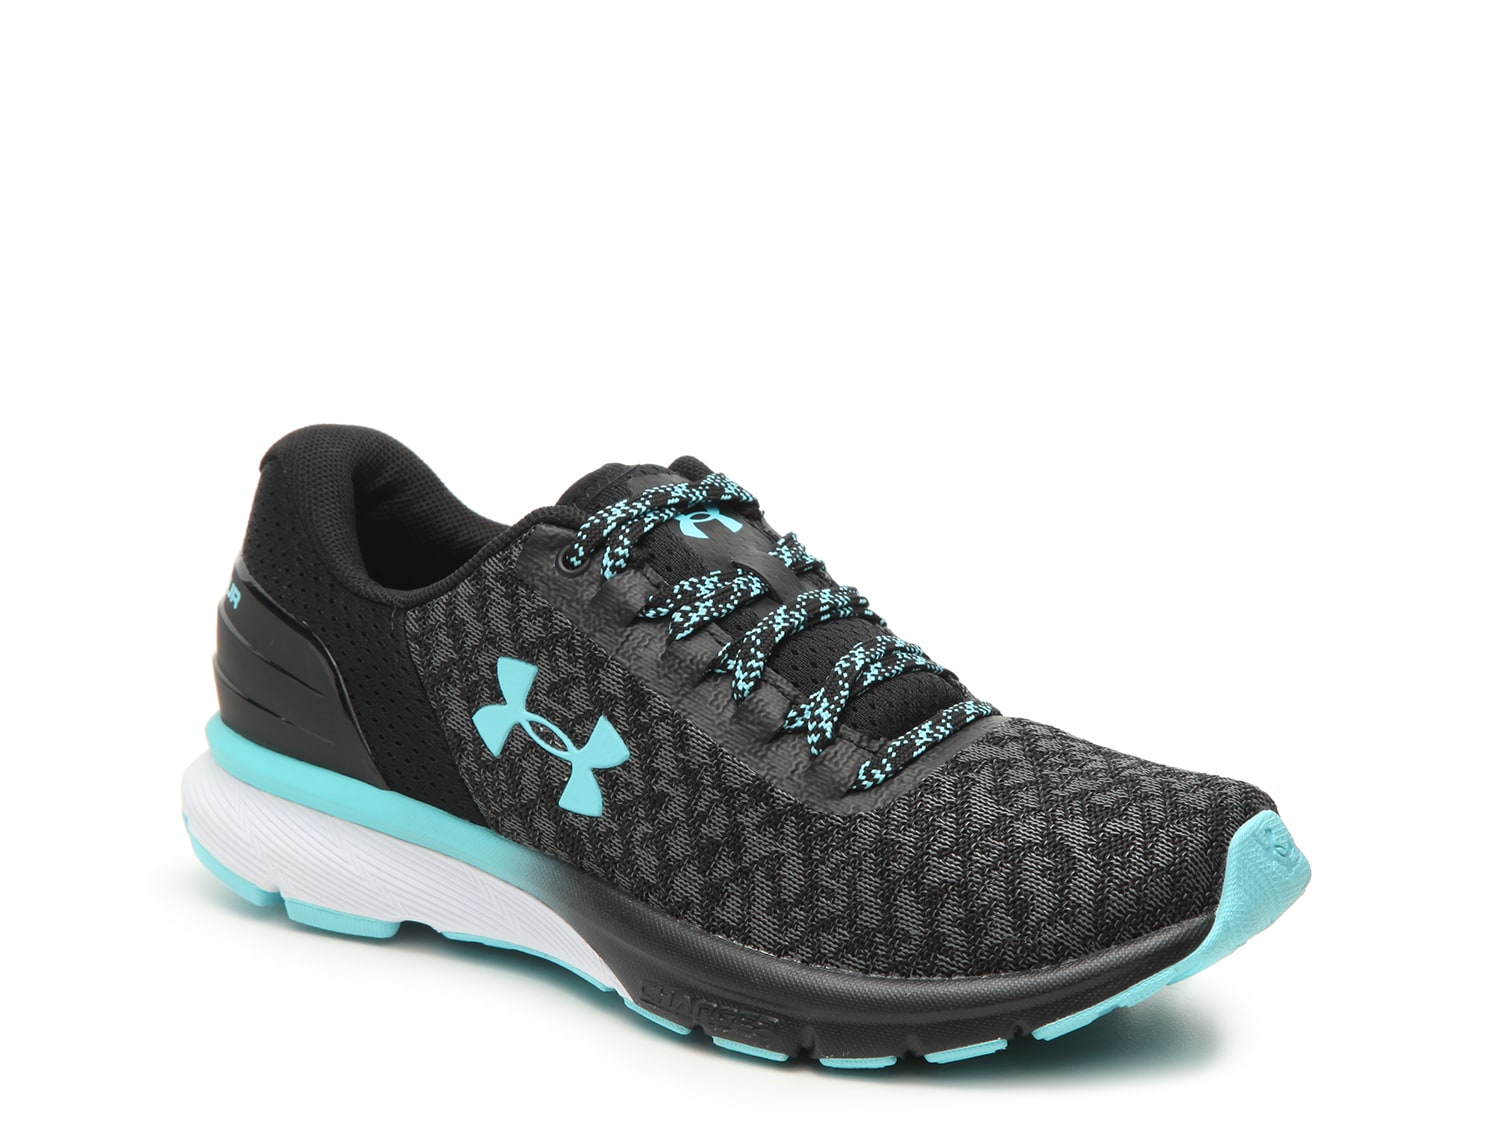 Under Armour Charged Escape 2 Lightweight Running Shoe - Women's | DSW